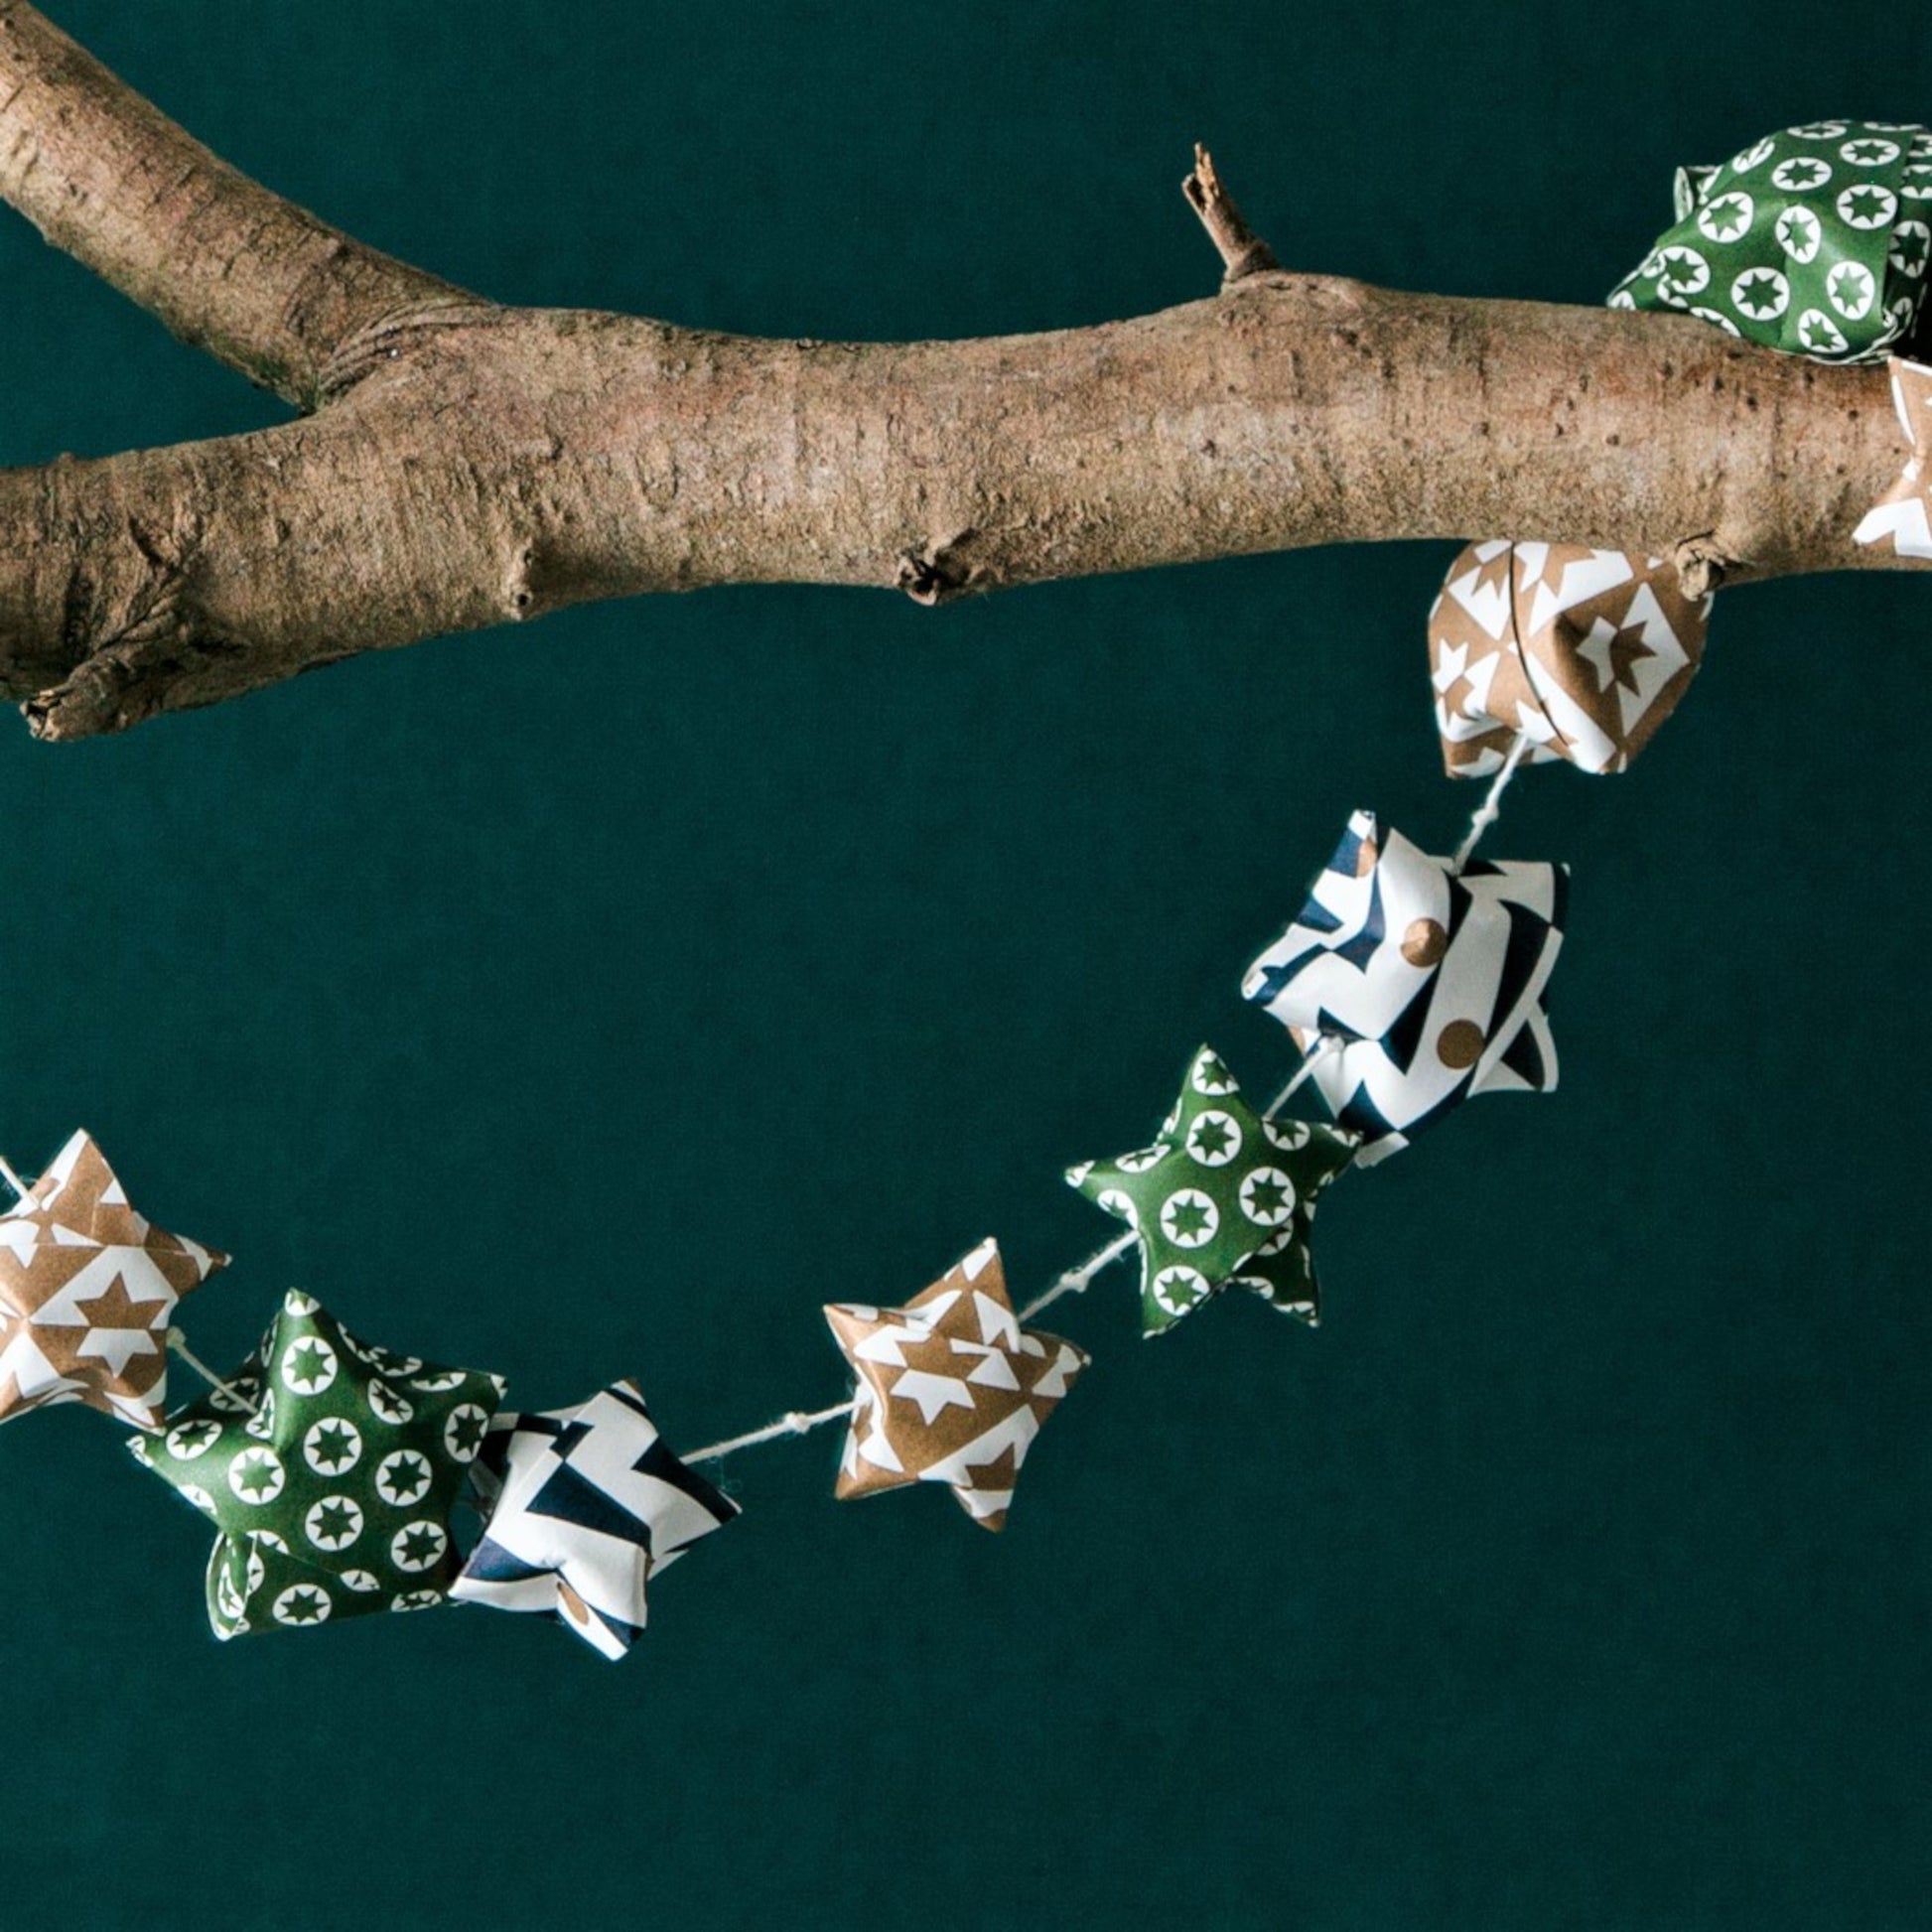 A garland of small paper origami patterned stars "lucky stars" in green, gold and dark blue, hanging from a branch